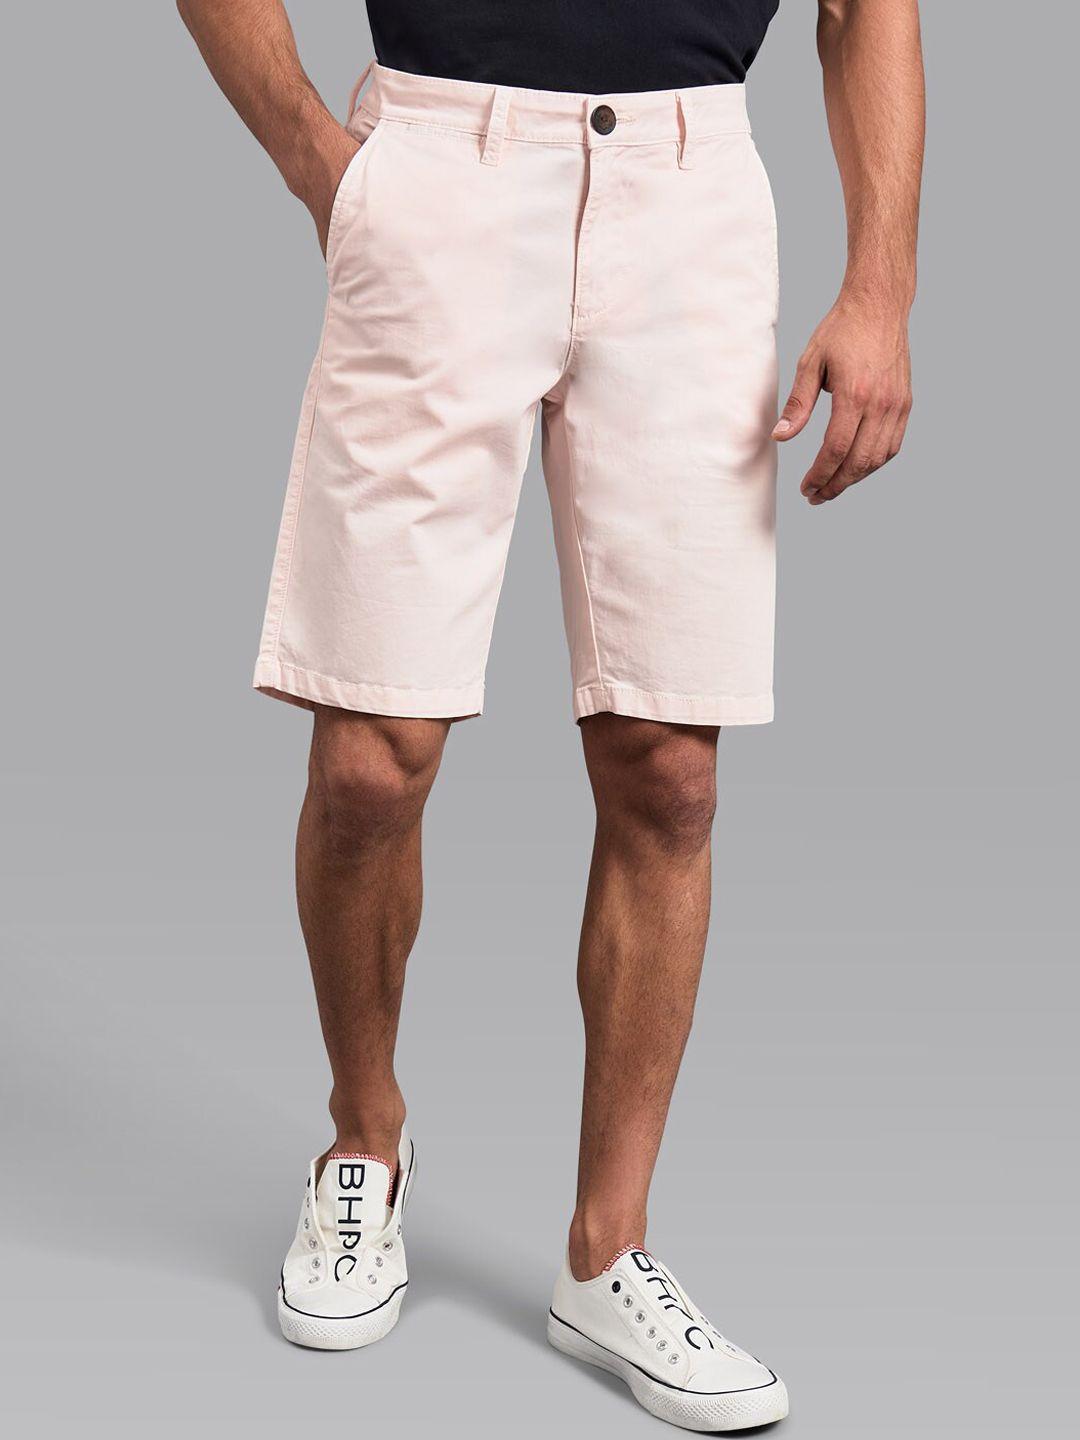 beverly hills polo club men pink slim fit shorts